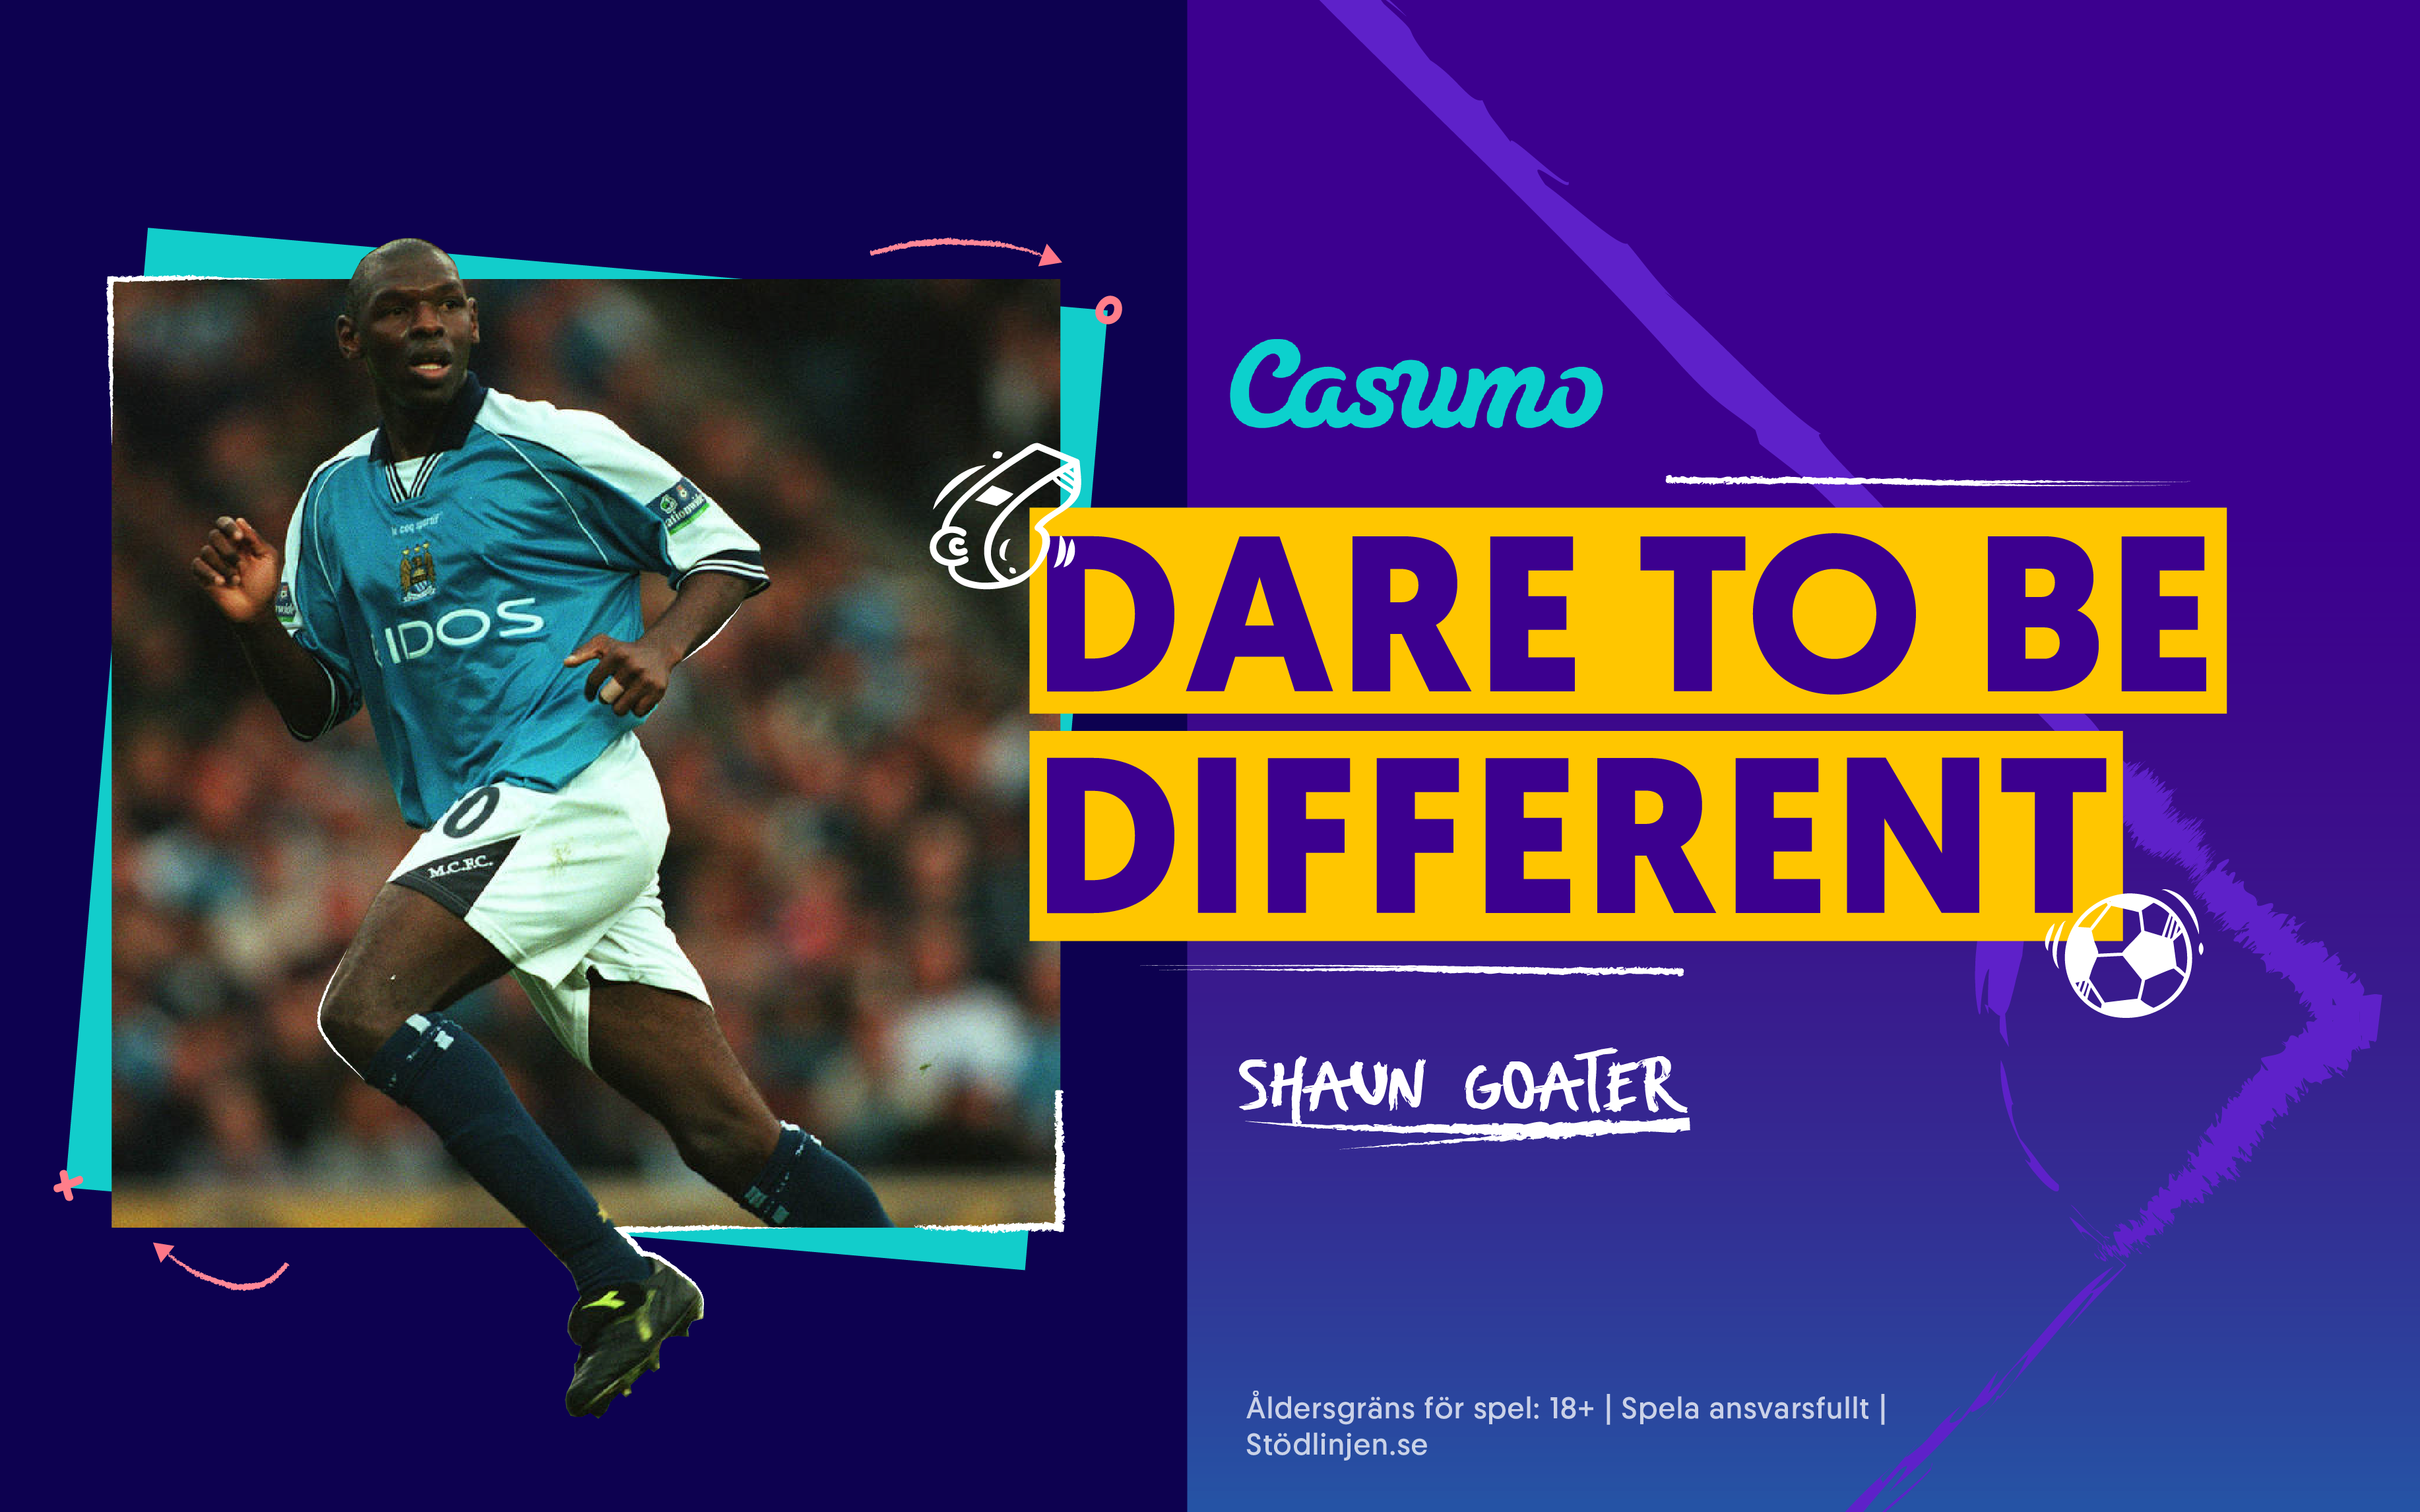 Shaun Goater Dare to be different